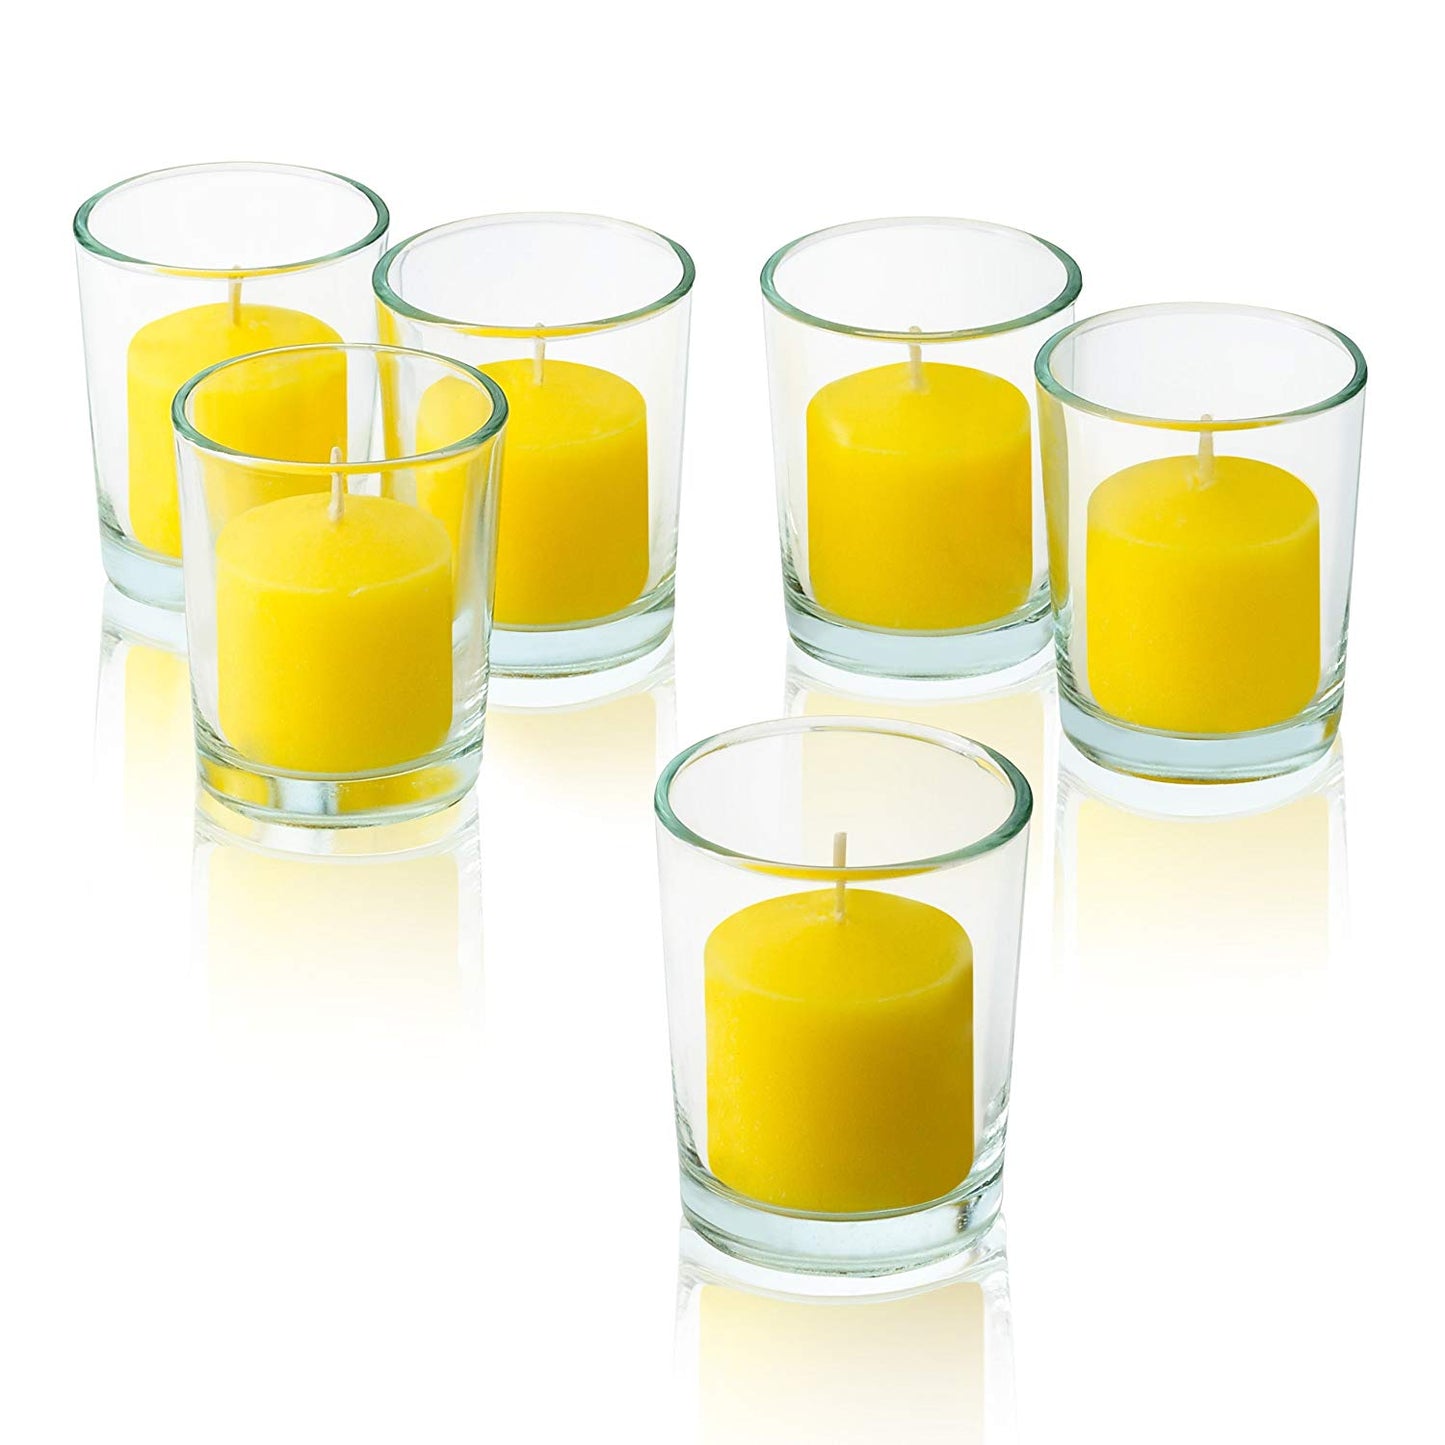 Wax Votive Candles 8 Hours Burning Unscented Ideal for Birthday Aromatherapy Party Candle Gardens & Home Décor (Set of 12, Yellow)